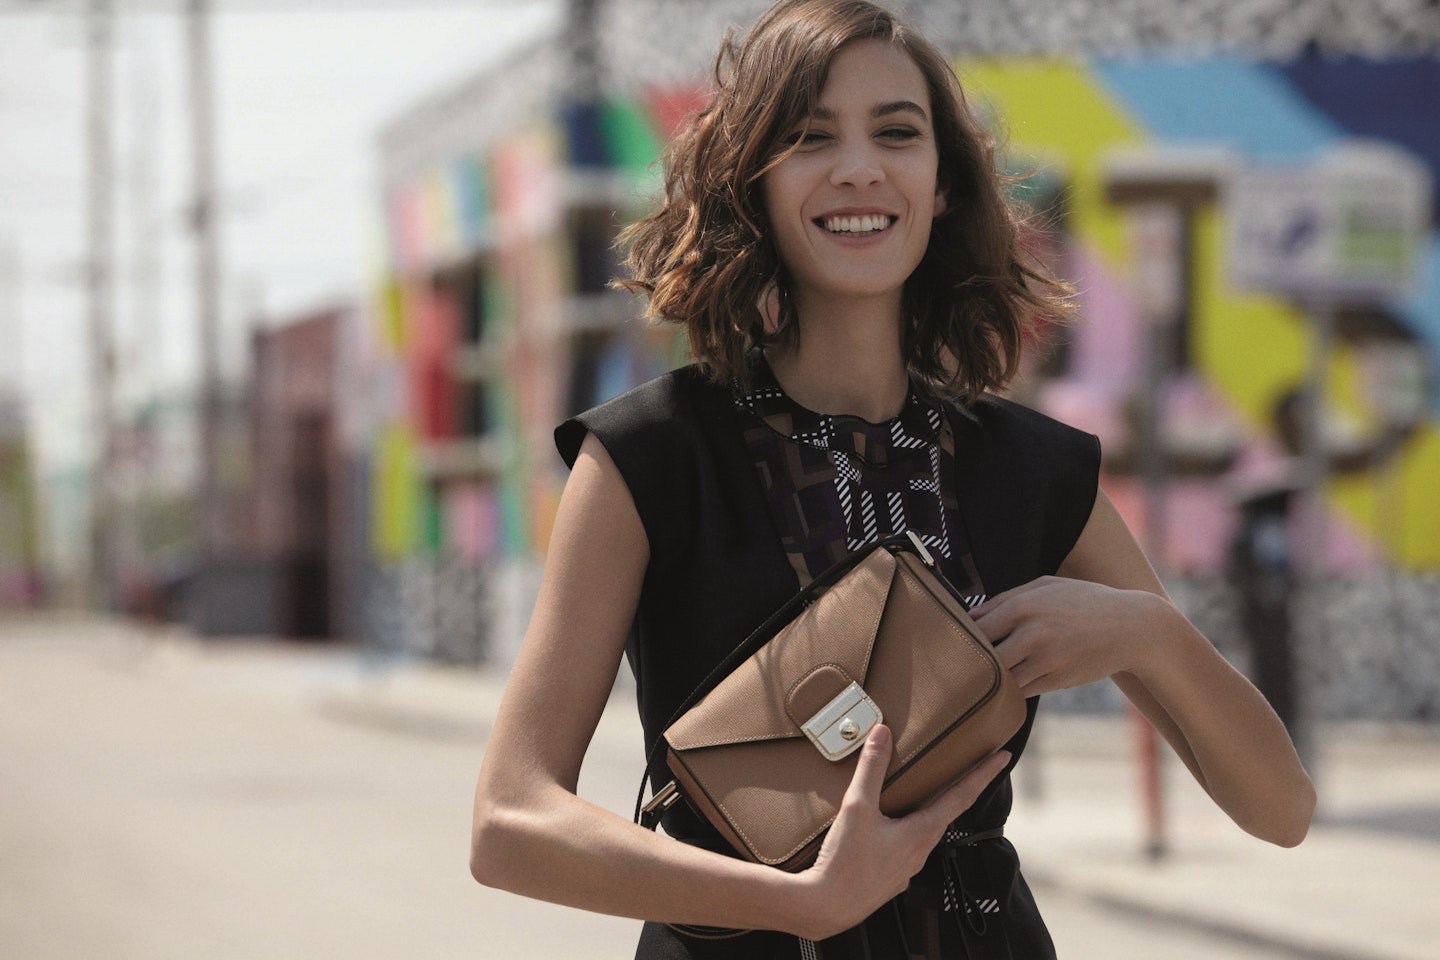 Alexa Chung in her third Longchamp campaign